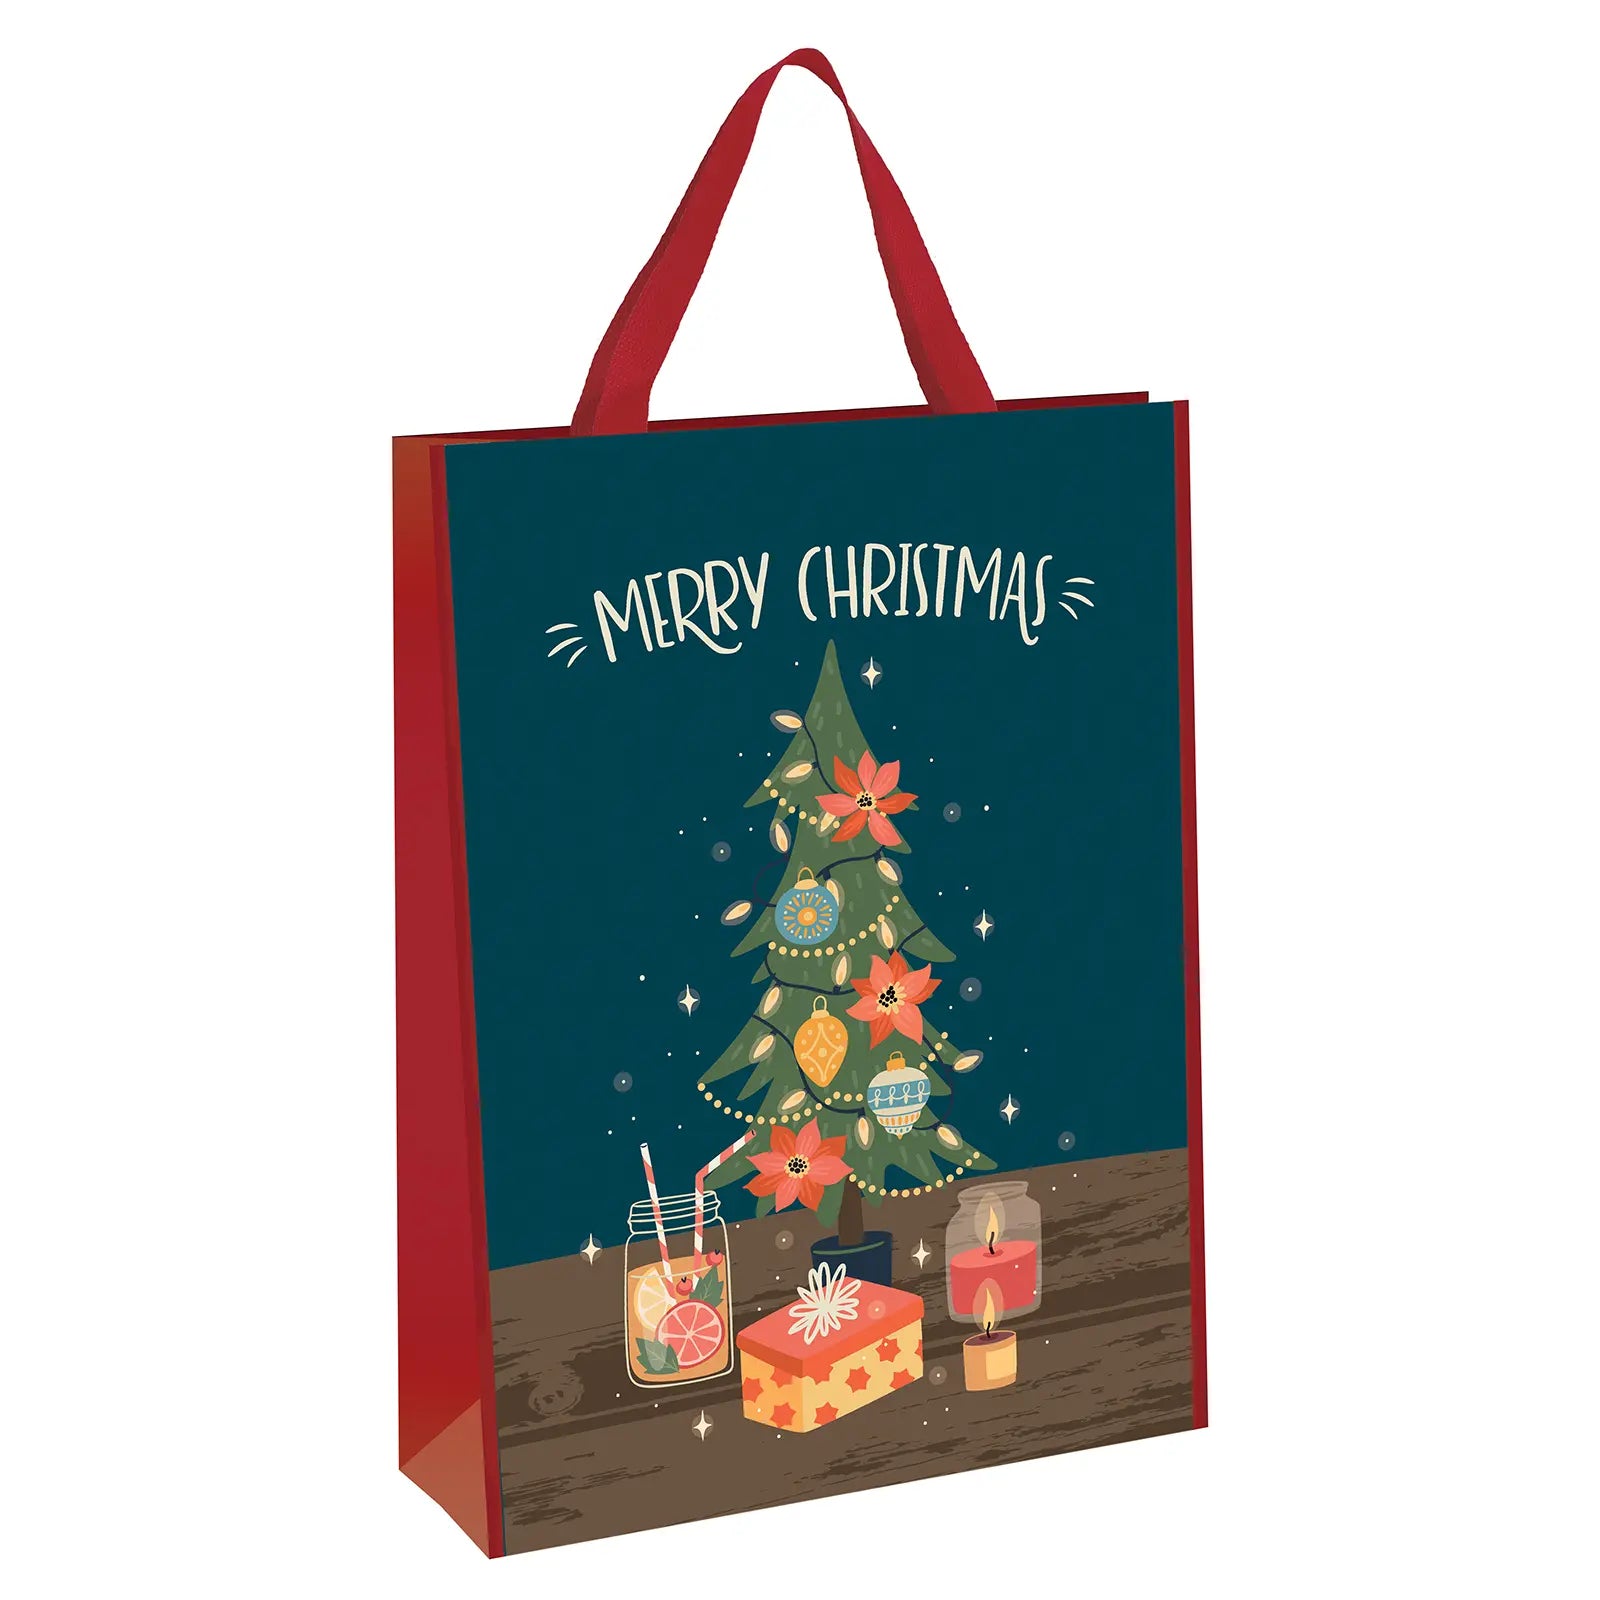 Merry Christmas gift bag featuring christmas tree with string lights, christmas gift, festive drink and candle design